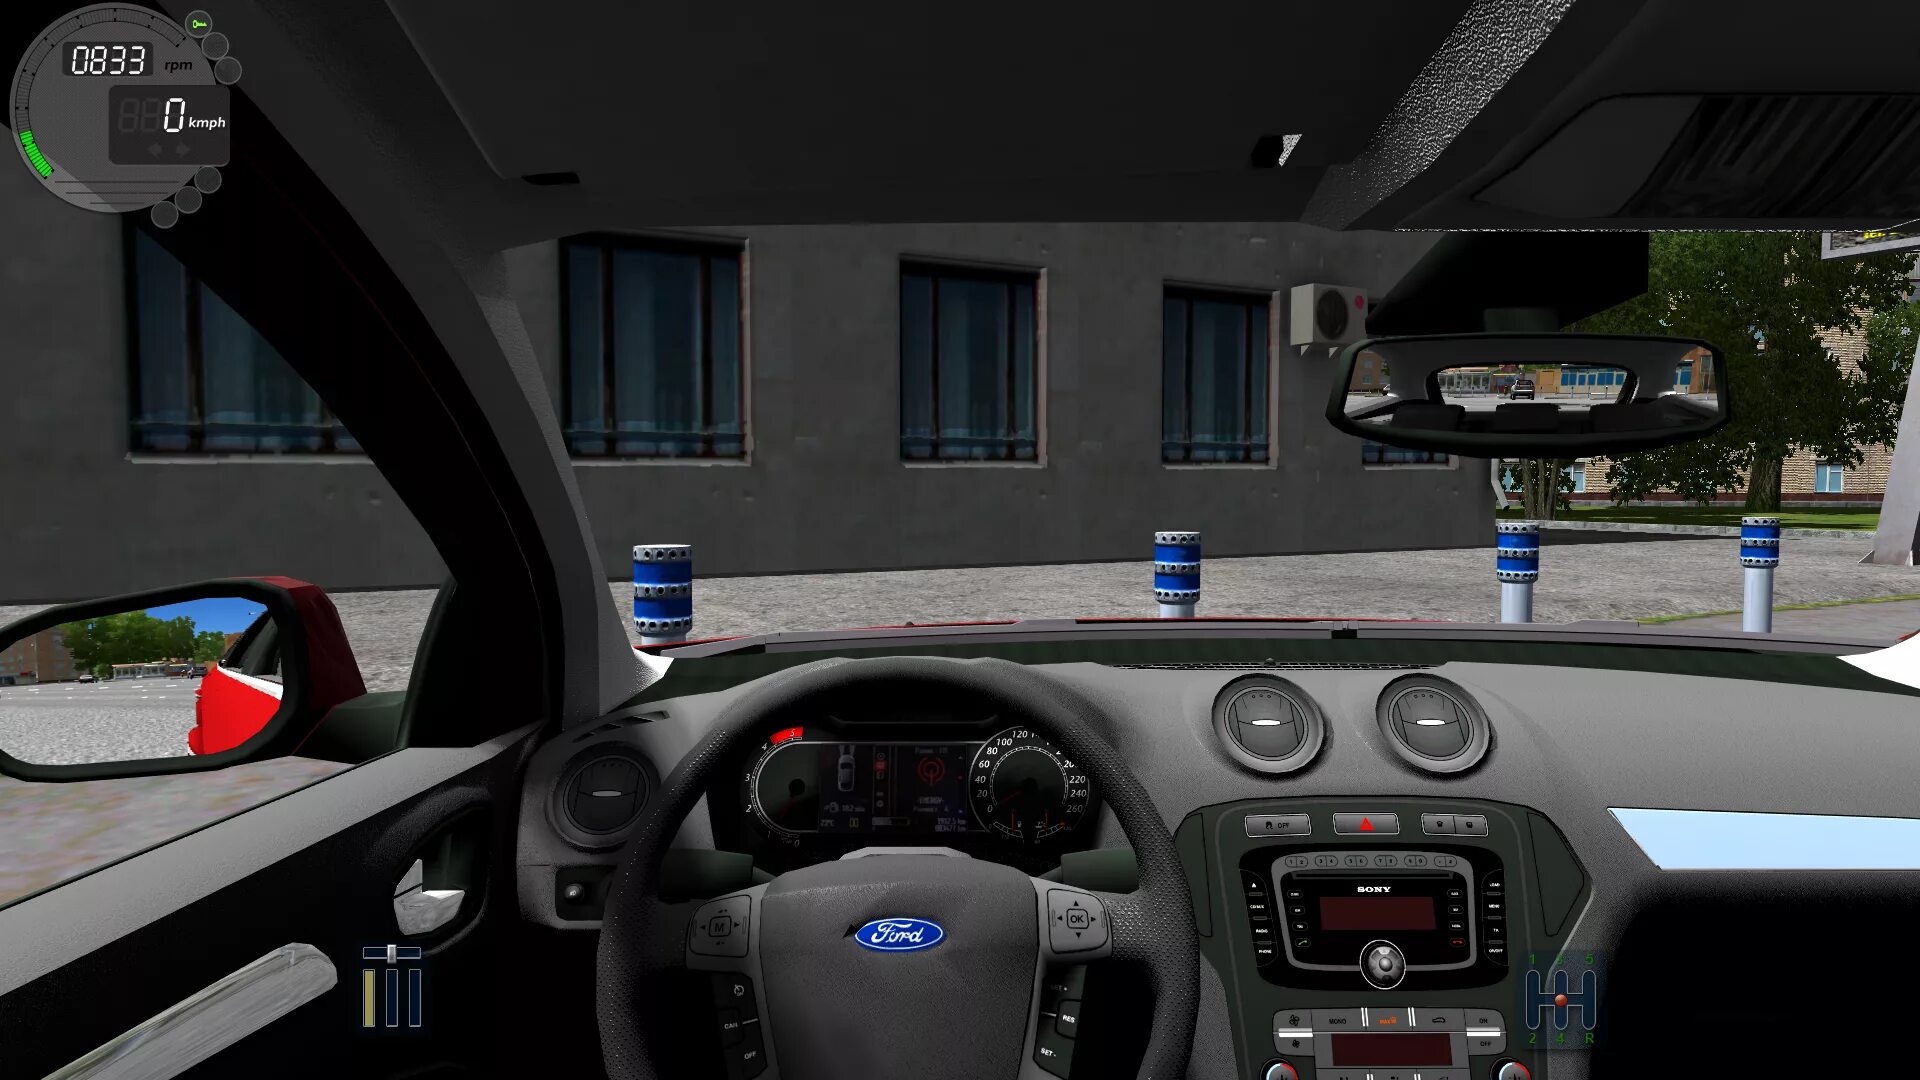 Ford Mondeo City car Driving. Симулятор вождения City car Driving. City car Driving 1.5.5.3. City car Driving 2007 г.. Открой city car driving